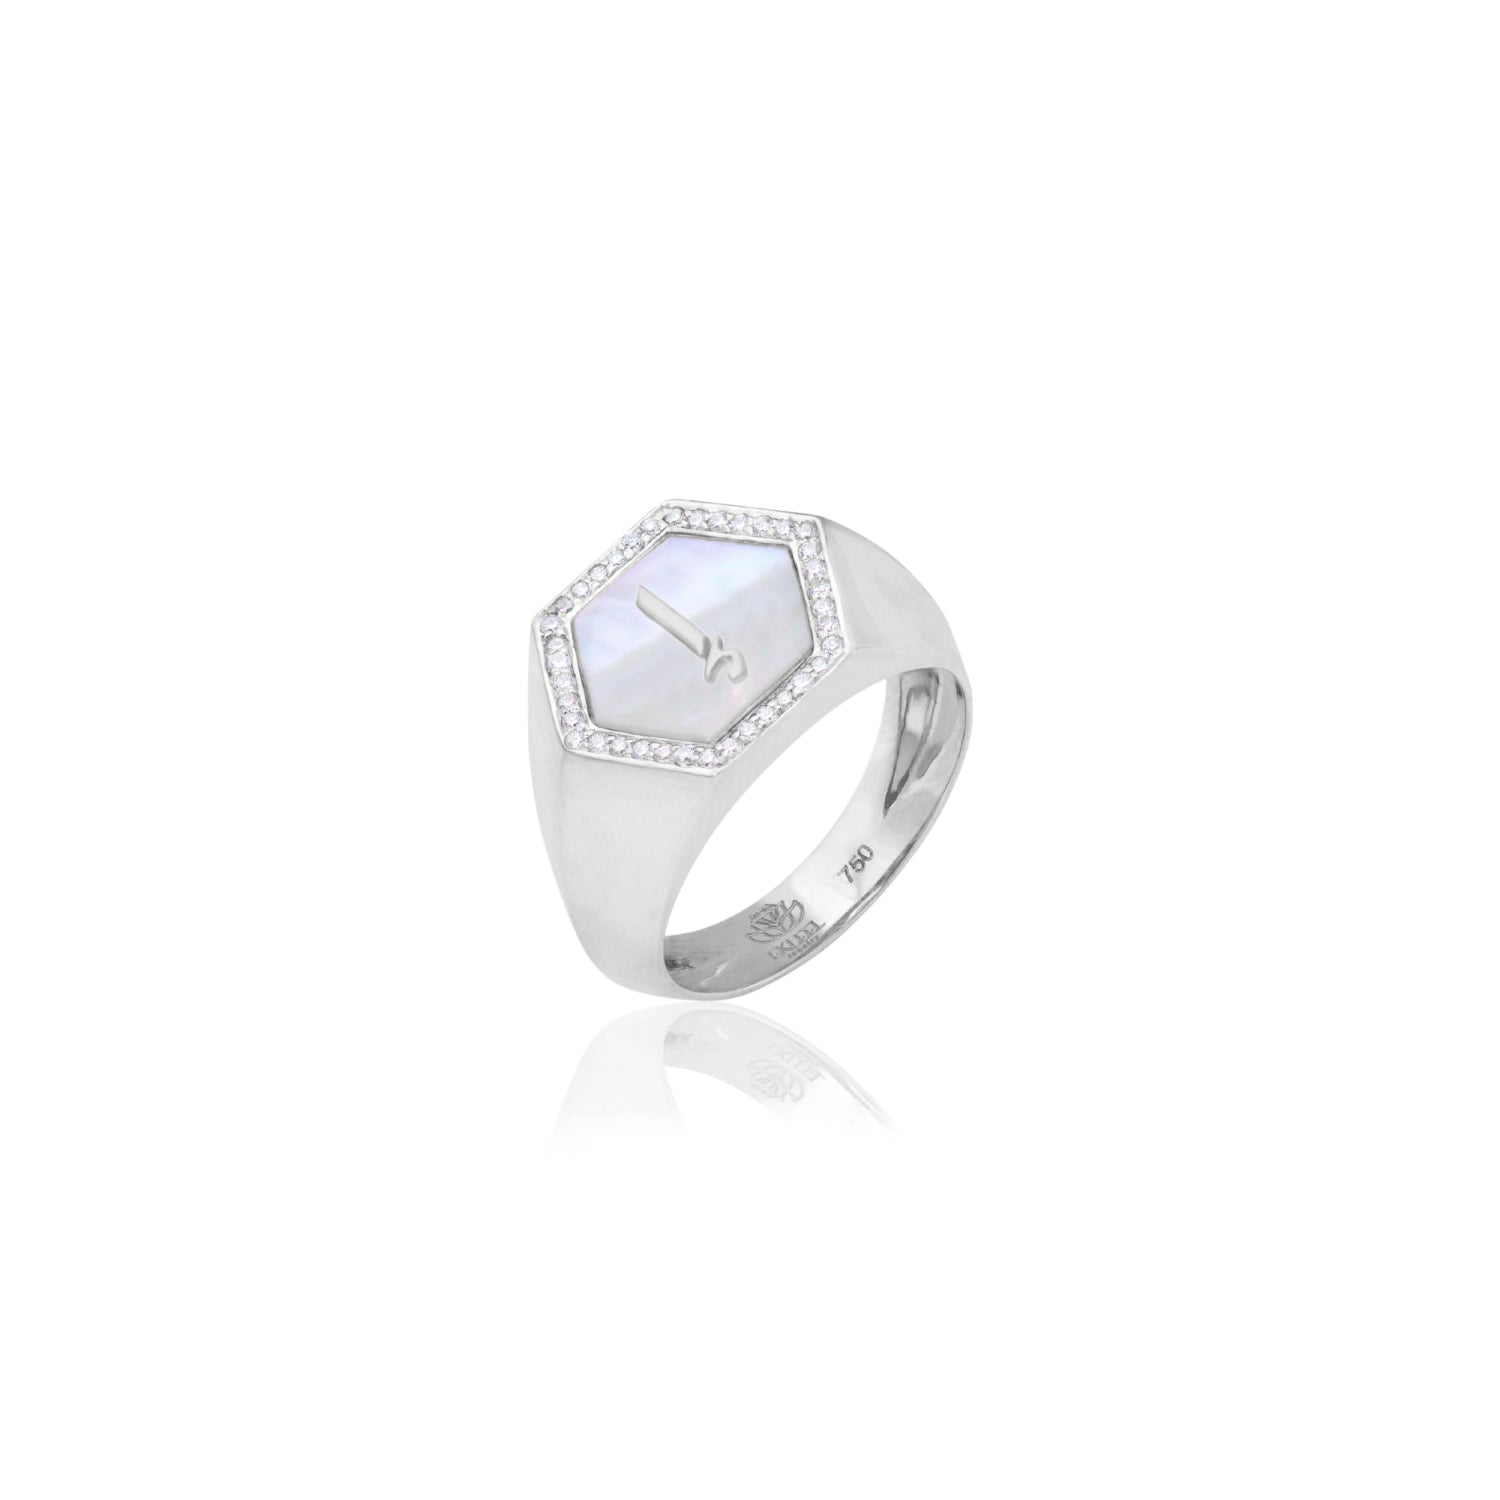 Qamoos 2.0 Letter إ White Mother of Pearl and Diamond Signet Ring in White Gold